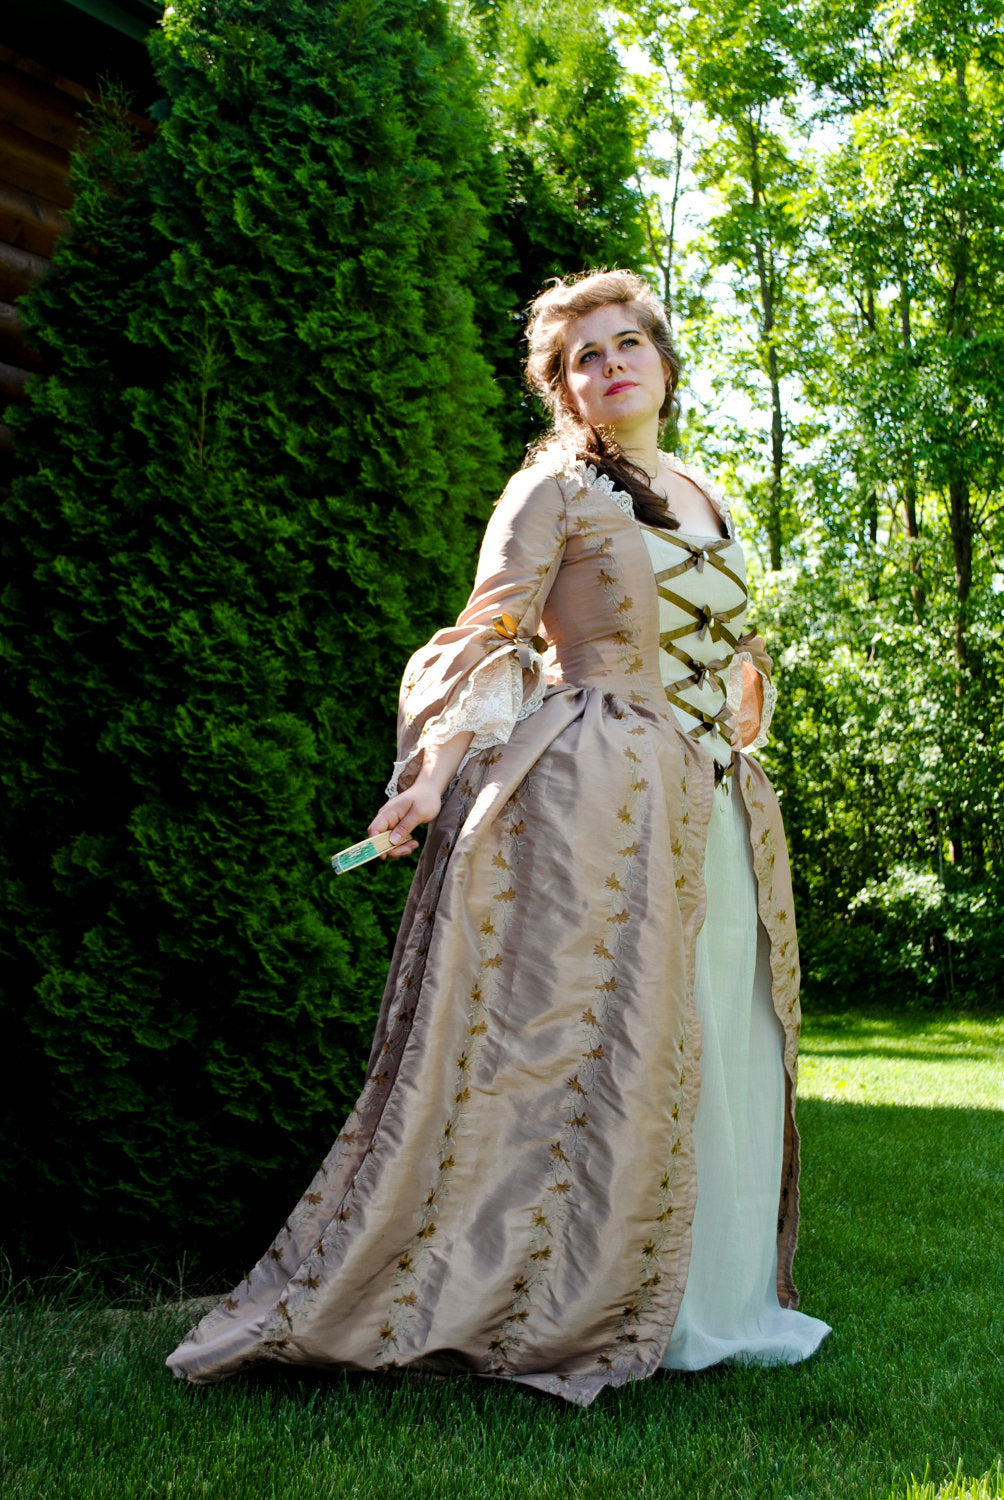 dress from the 1700s